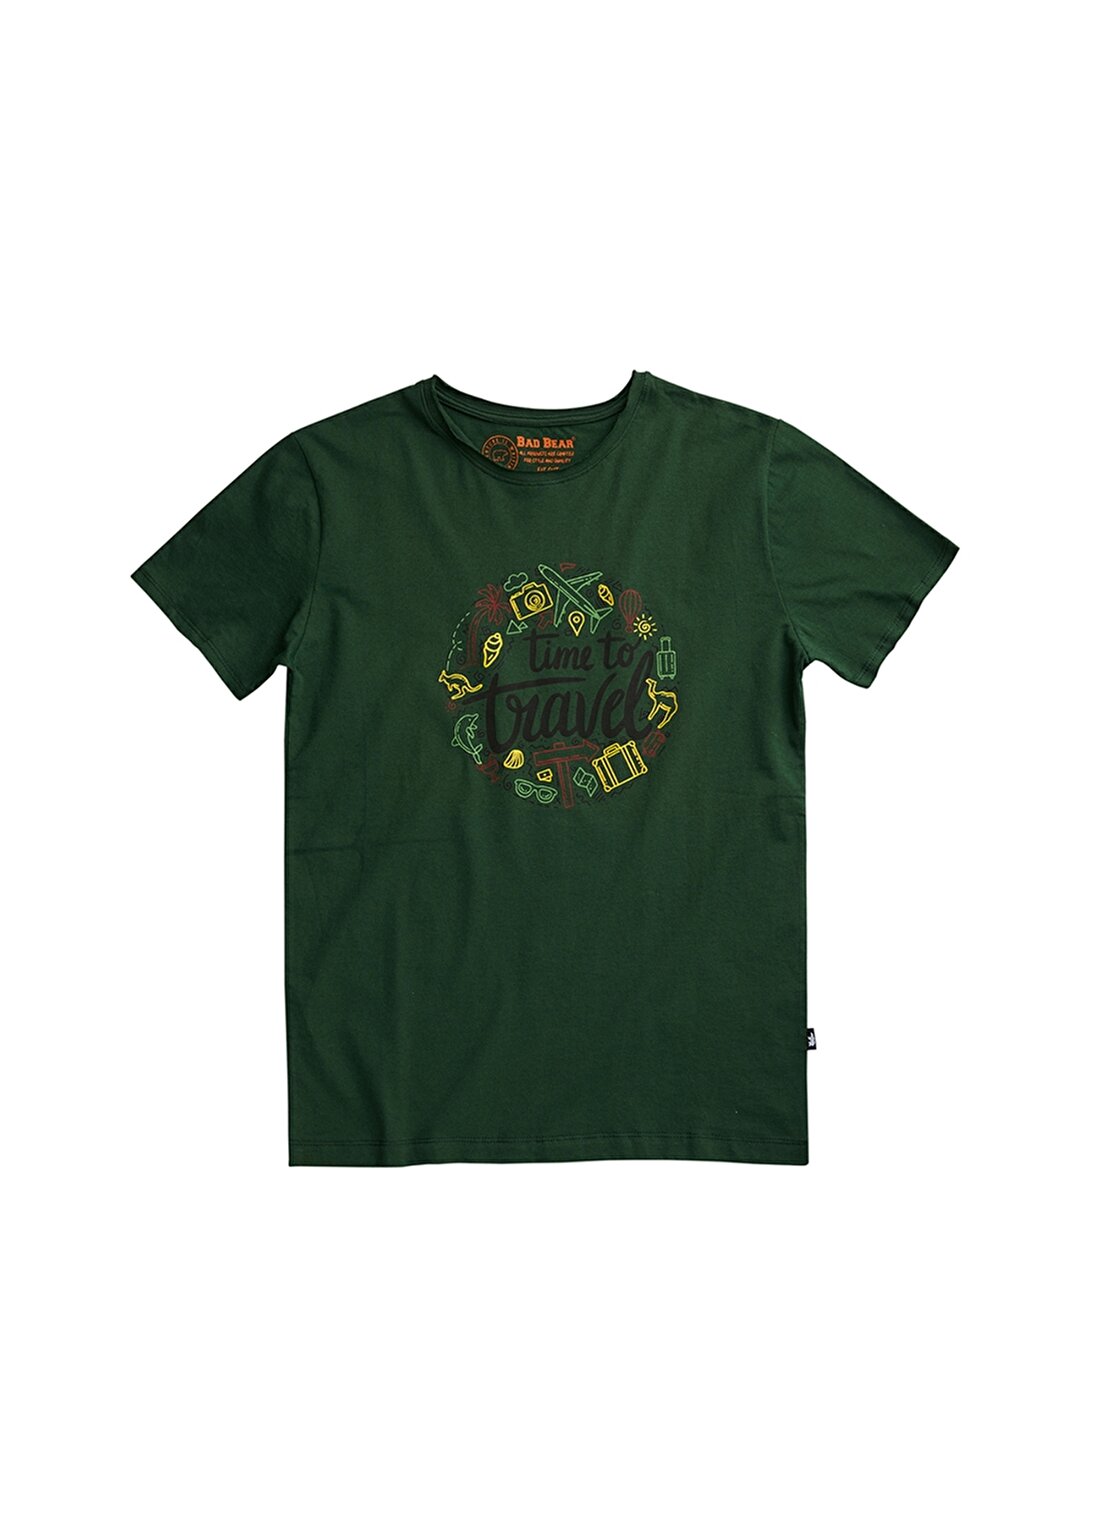 Bad Bear Time To Travel T-Shirt